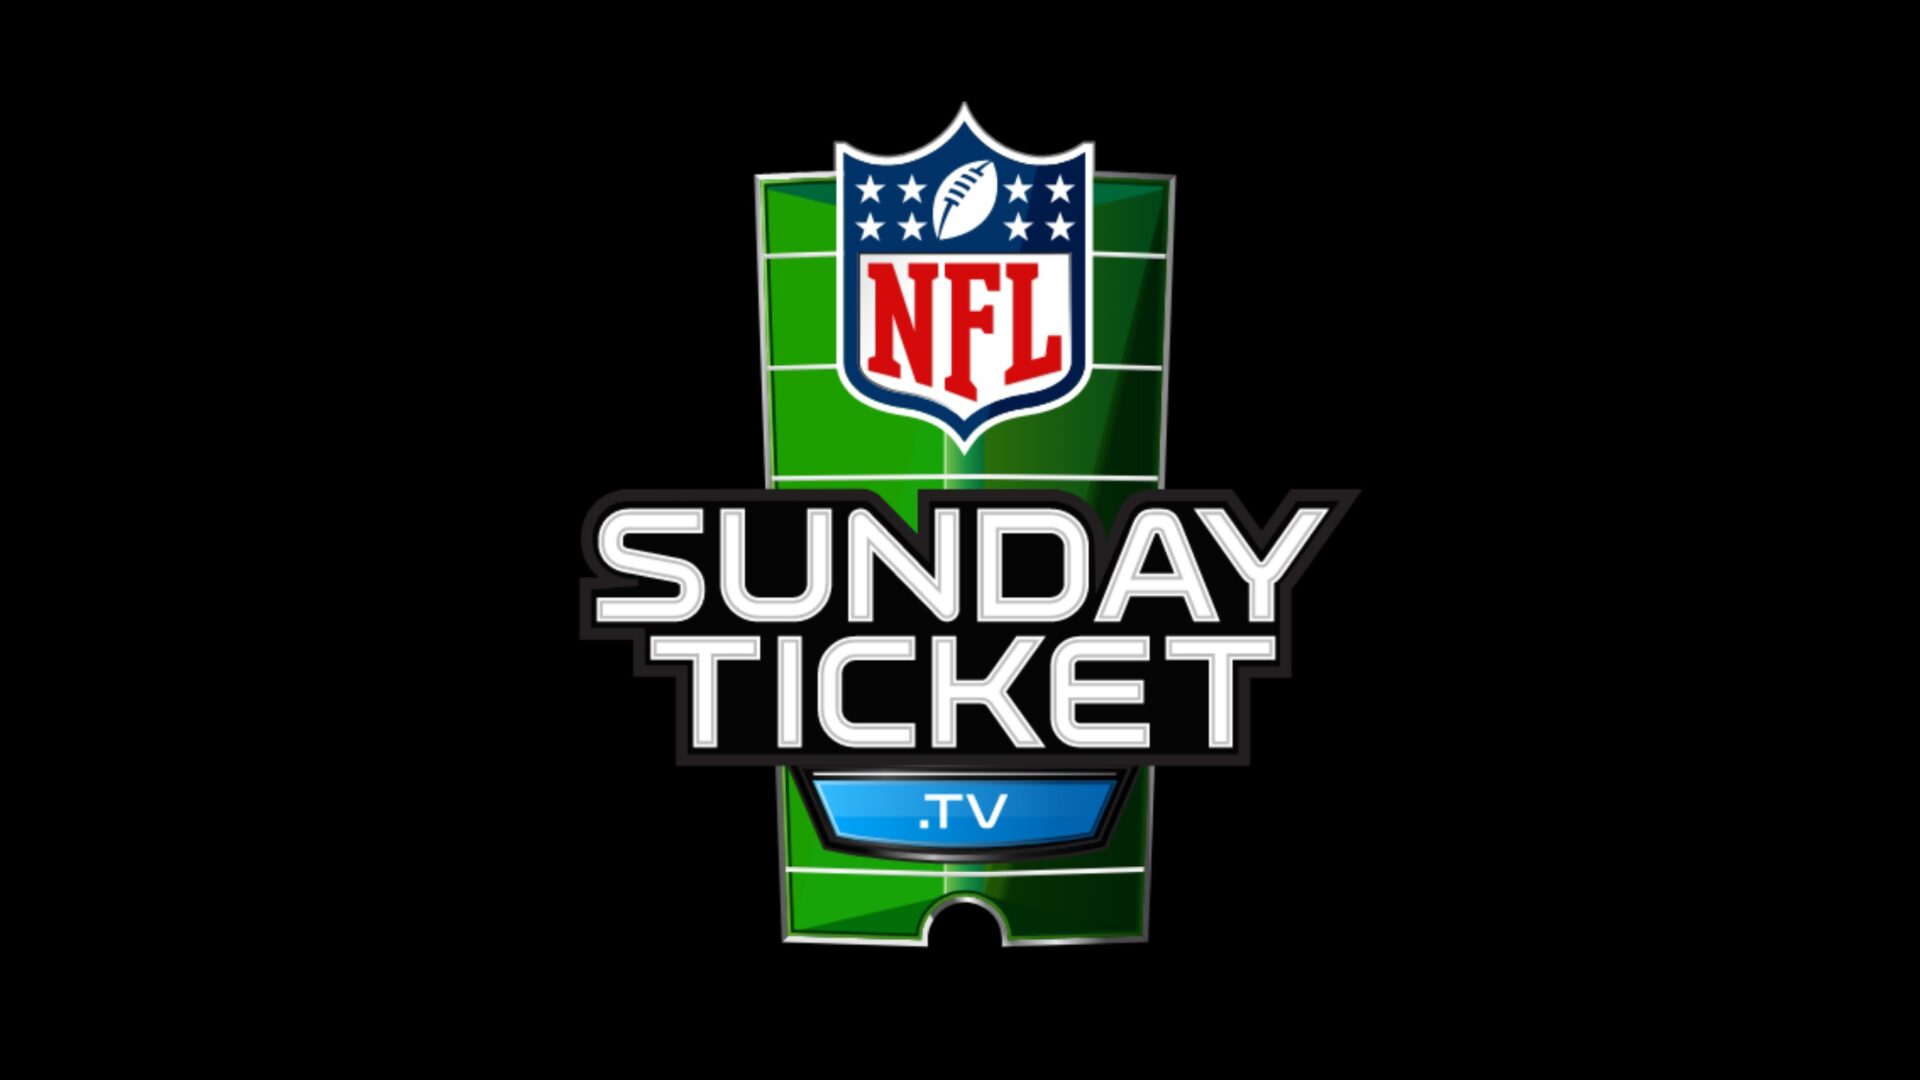 YouTube Scores Touchdown with NFL Sunday Ticket, Apple Steps Out of Bounds • iPhone in Canada Blog